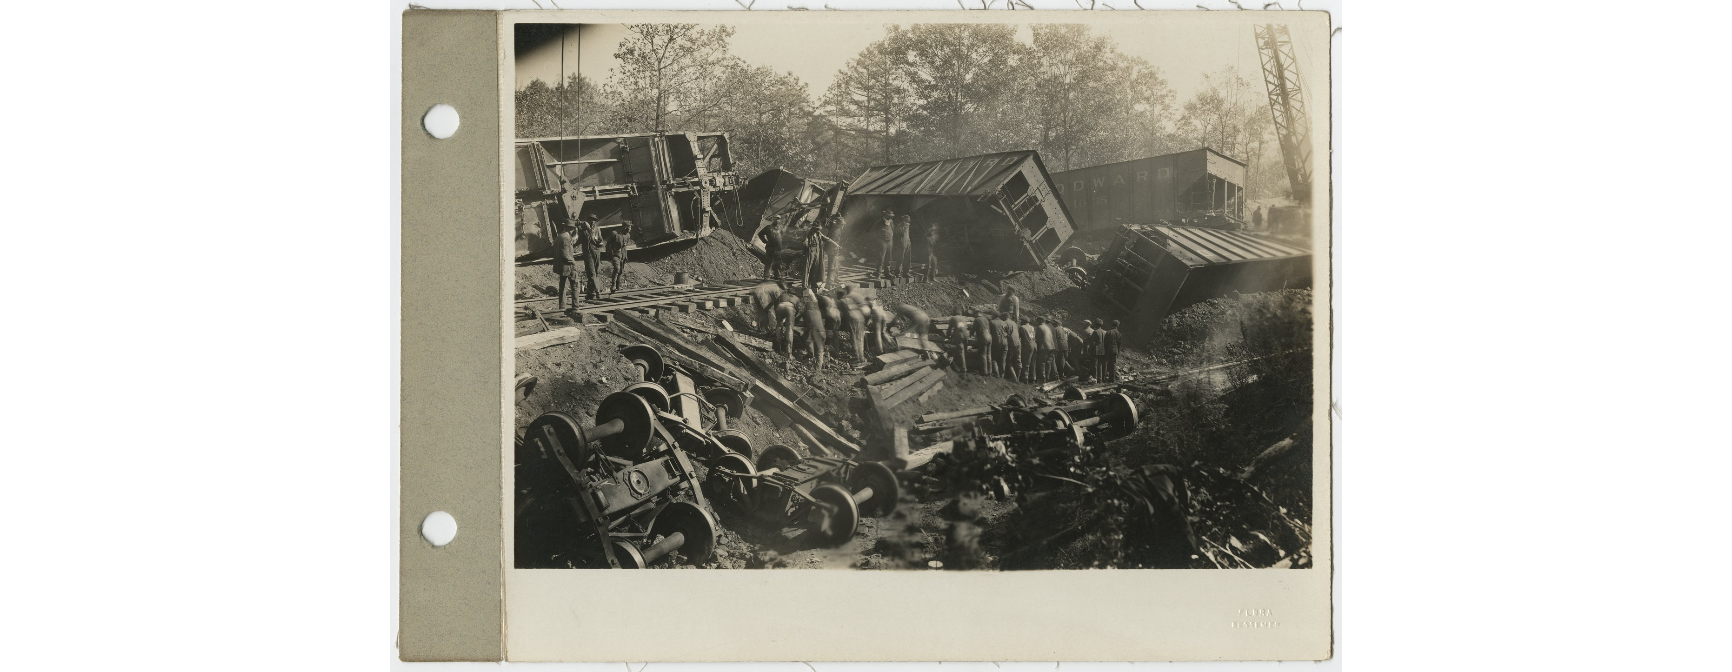 Workers Clearing Train Wreck